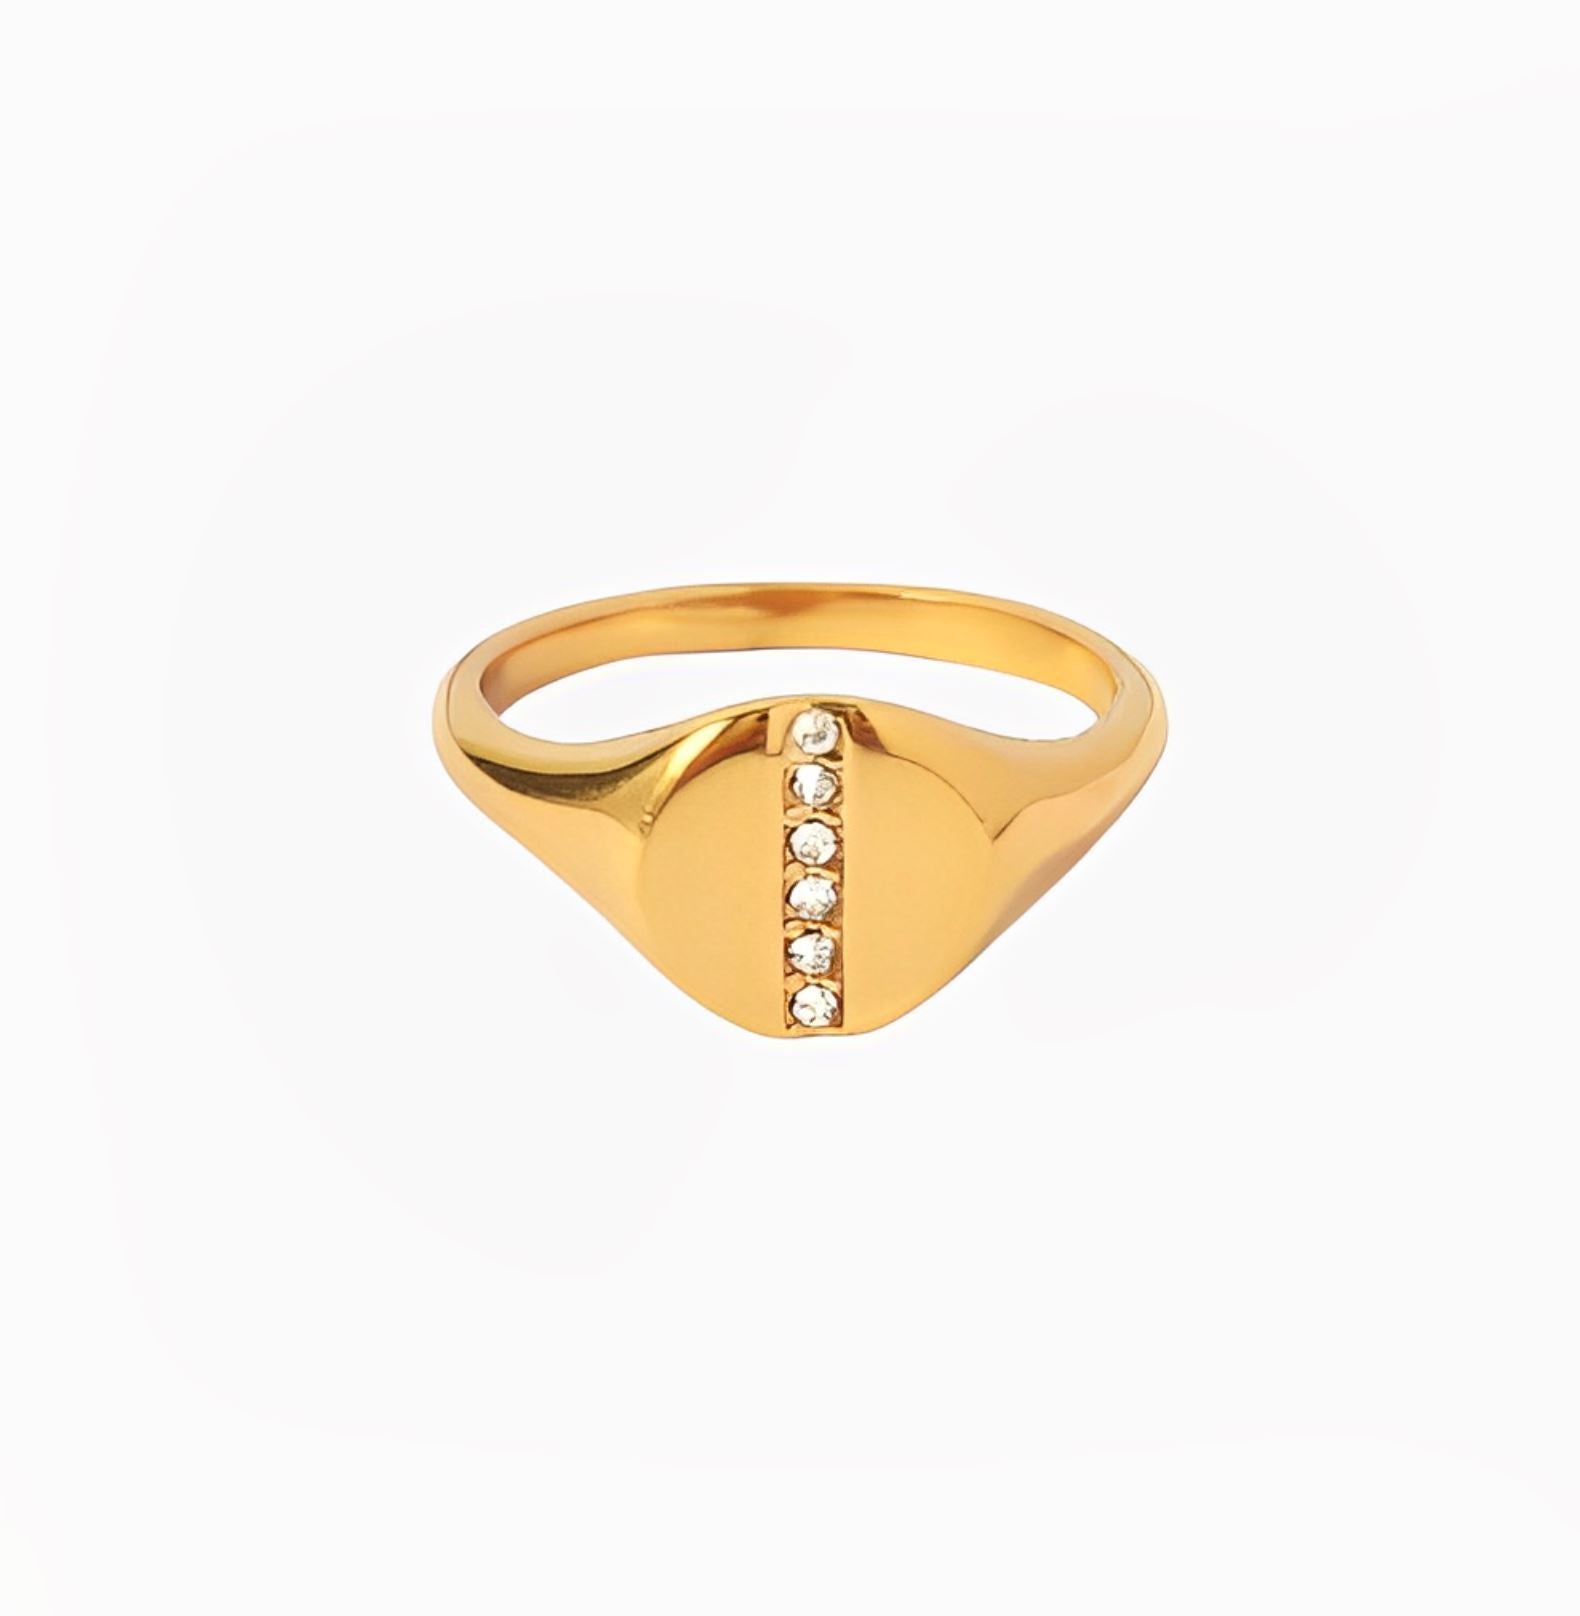 YO SIGNET RING braclet Yubama Jewelry Online Store - The Elegant Designs of Gold and Silver ! 